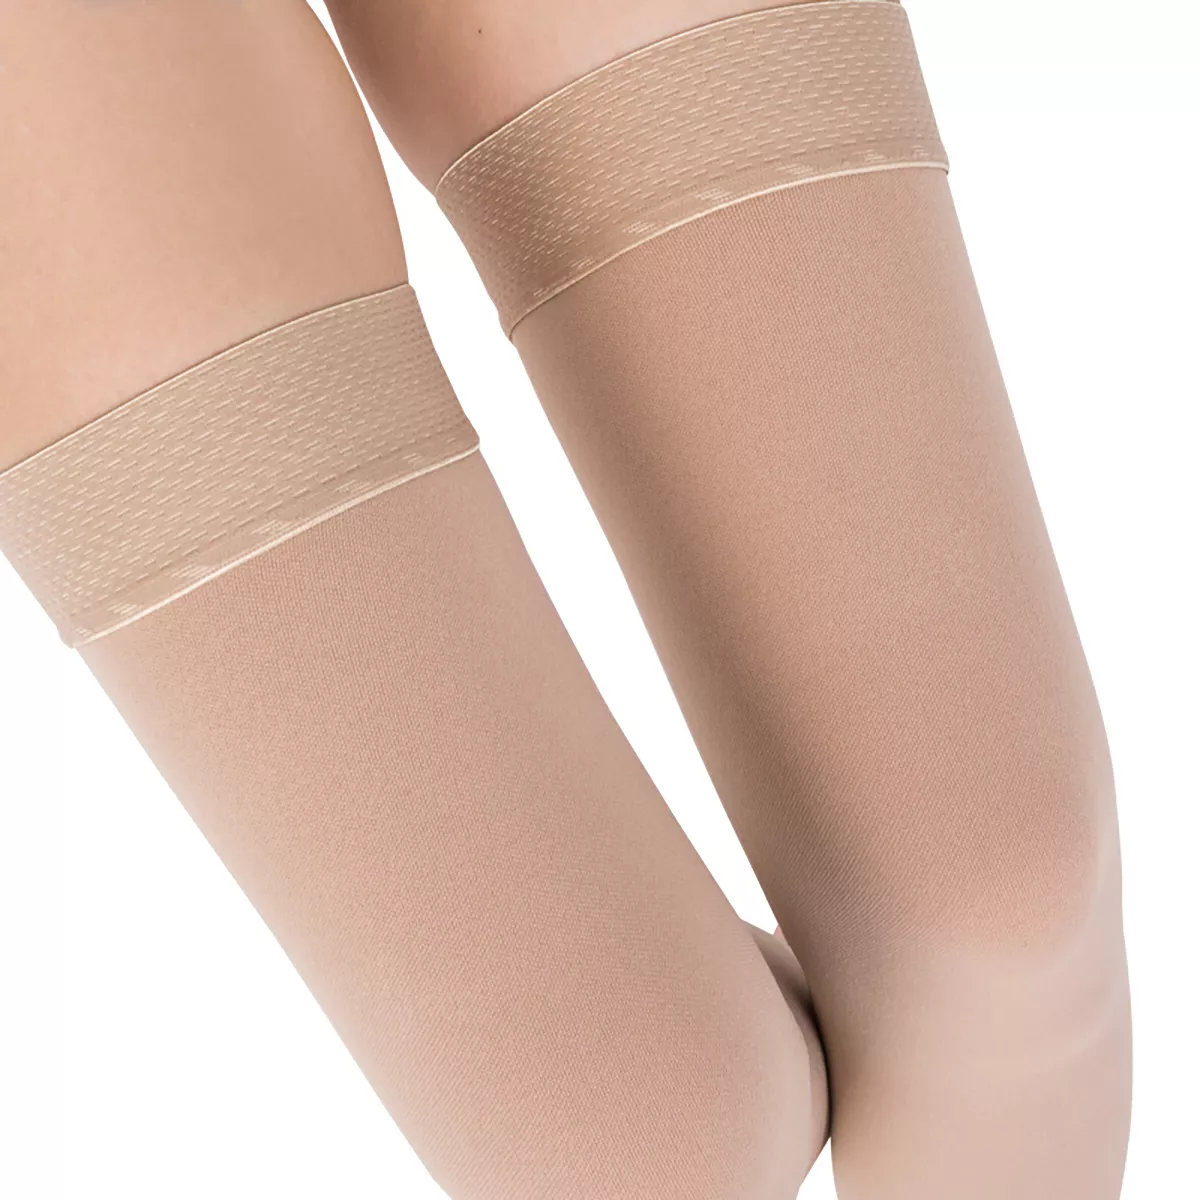 Footless Compression Tights for Women Circulation 20-30mmHg - Beige, Large  